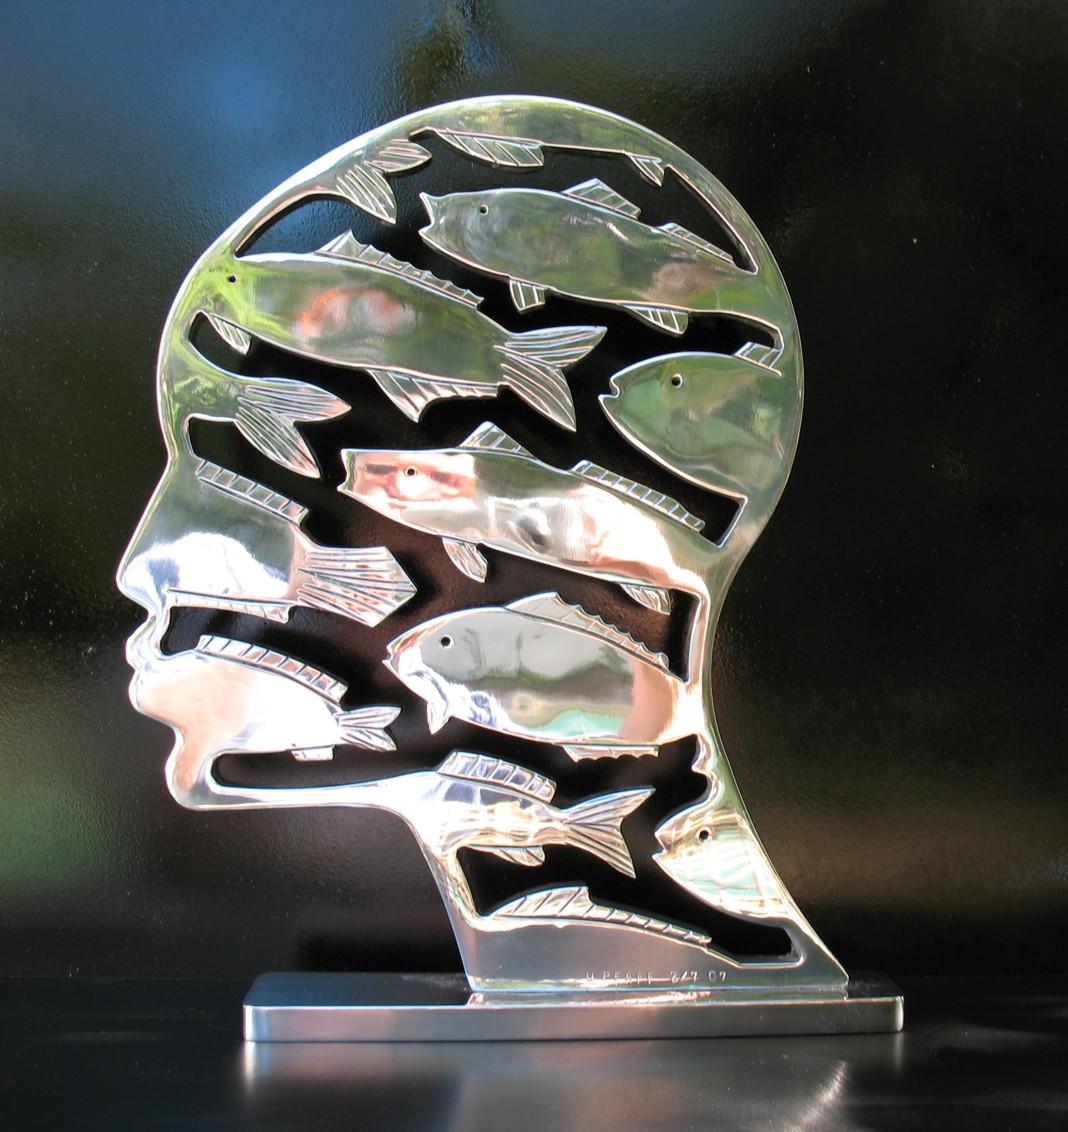 Uwe Pfaff Abstract Sculpture - Limited Edition Nickel Plated Steel Sculpture "School of Thought"